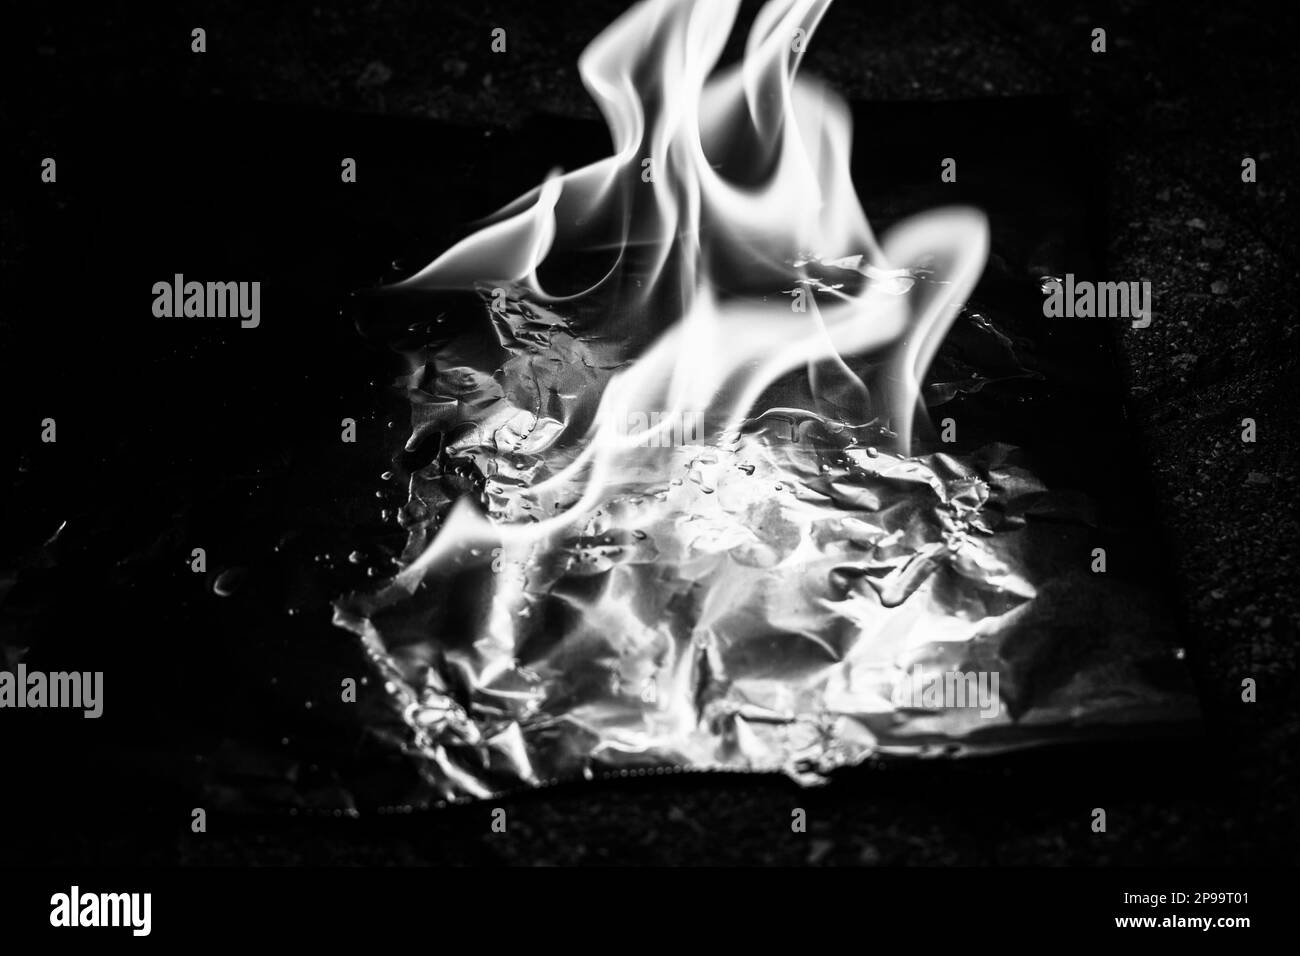 Burning Fire Background, Combustion, Raging, Fire Background Image